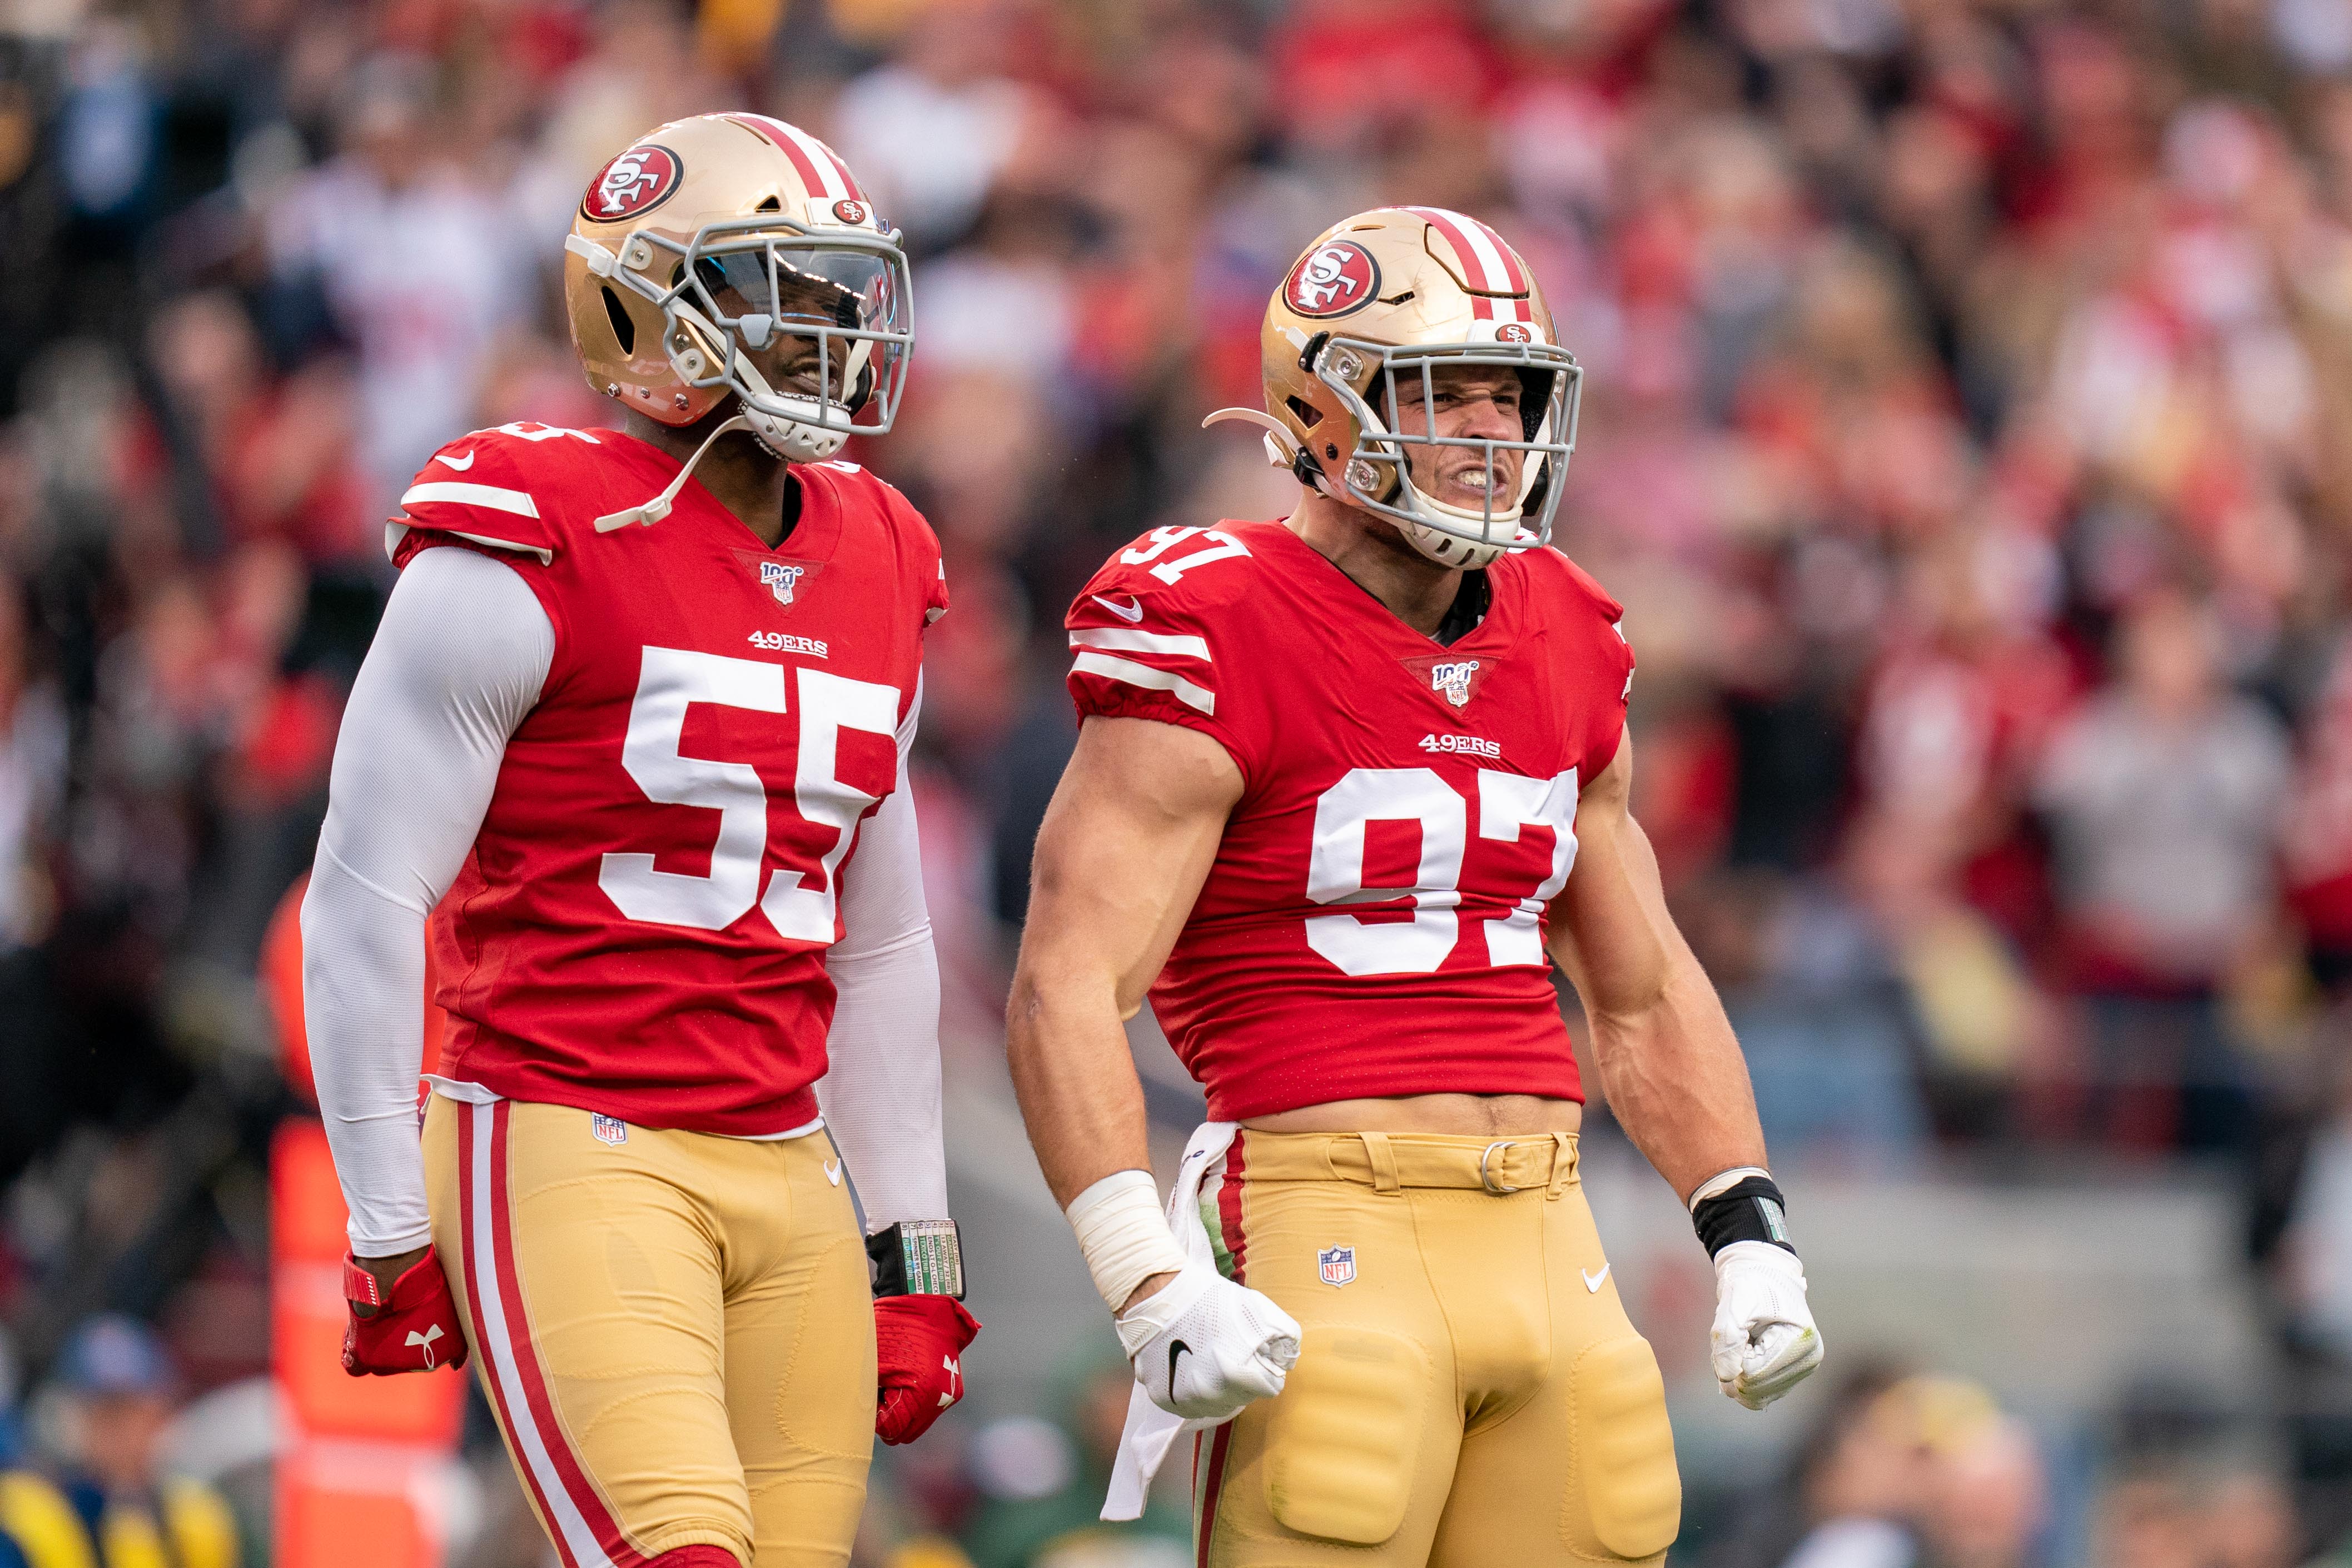 Is it Time for the 49ers to Change Their Uniforms? - Sports